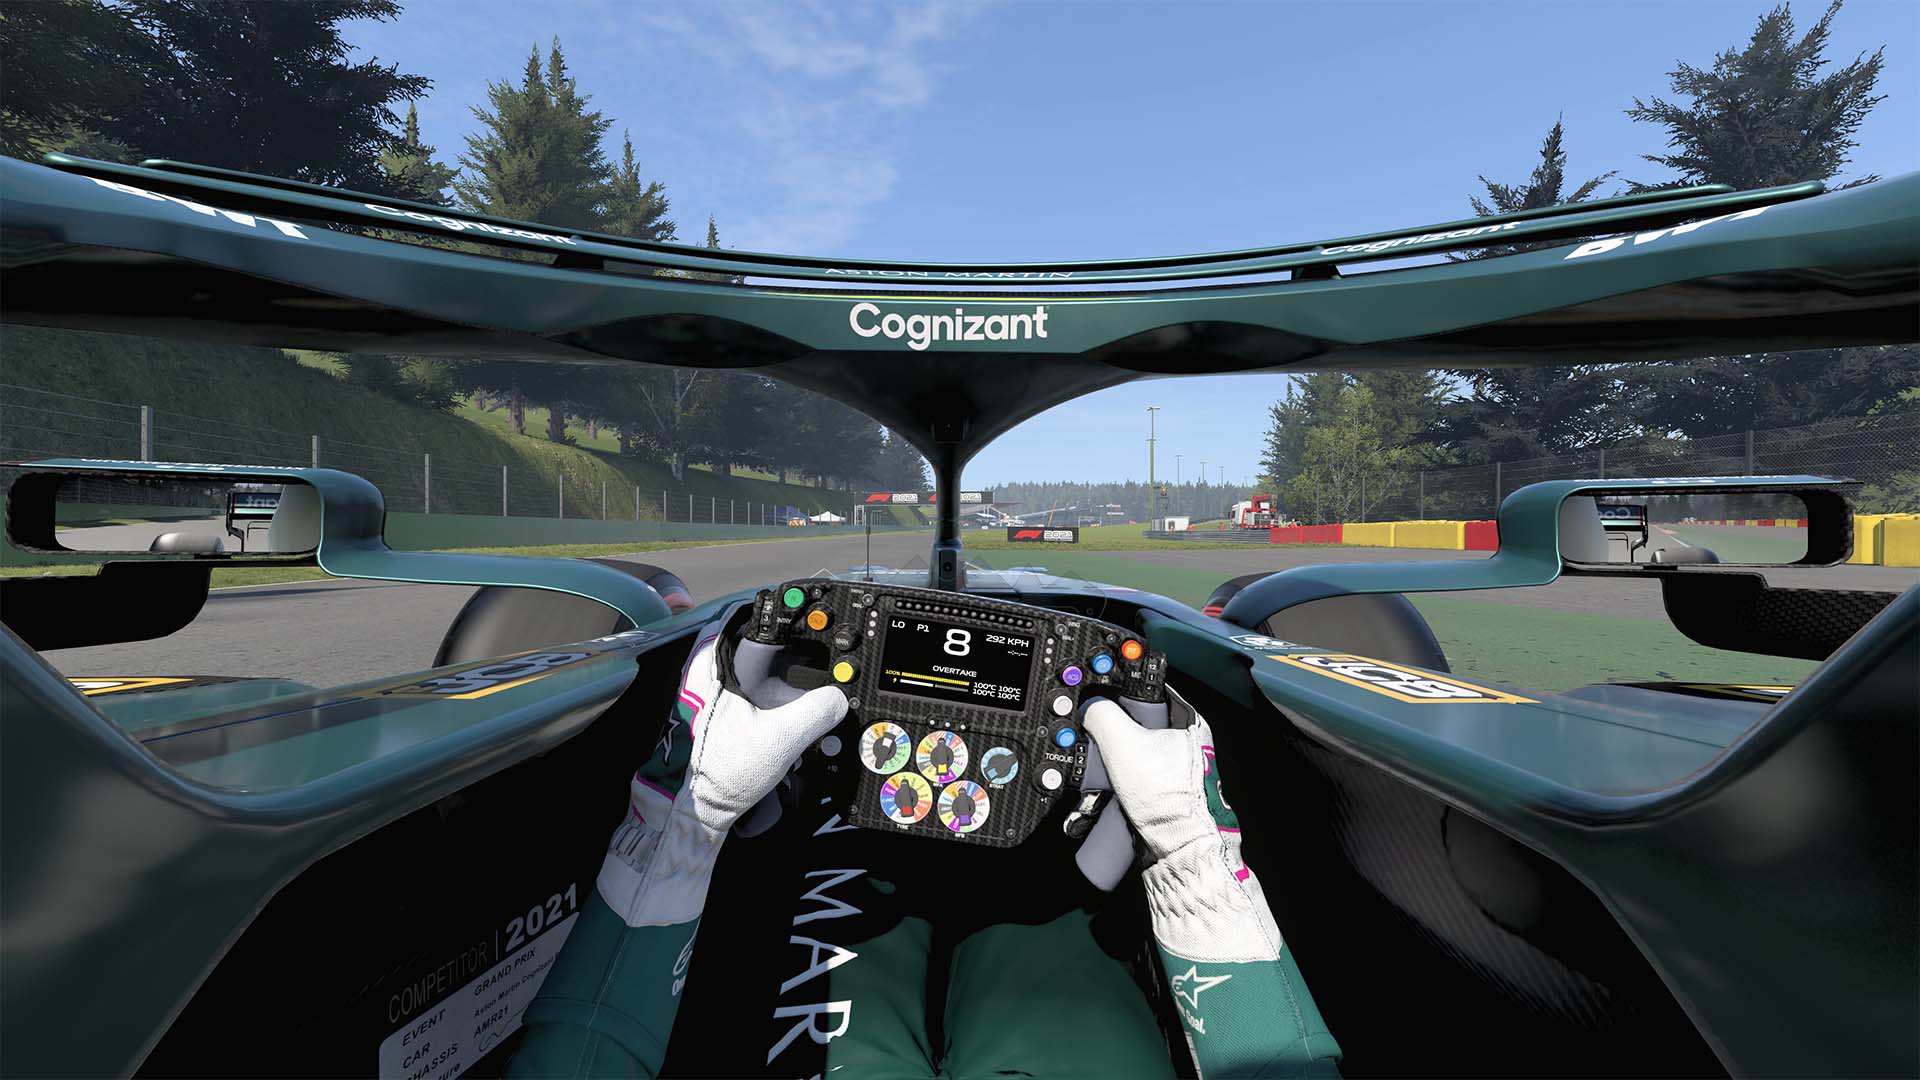 An image showing the cockpit of an Aston Martin F1 car.